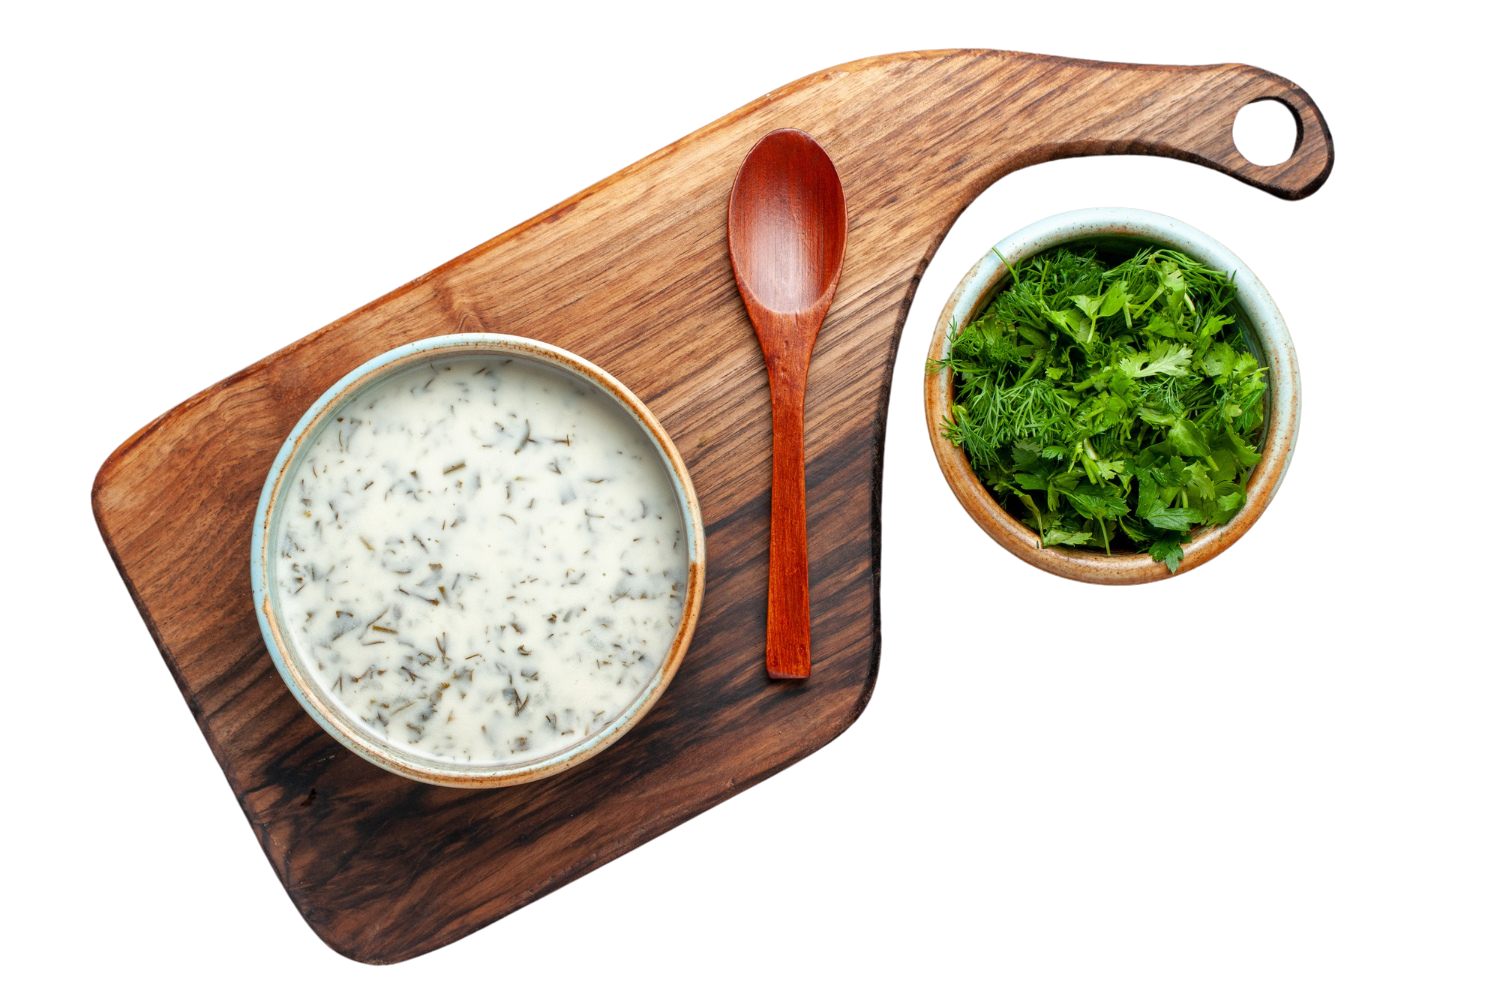 What spring herbs to accompany your homemade yogurt in the kitchen?